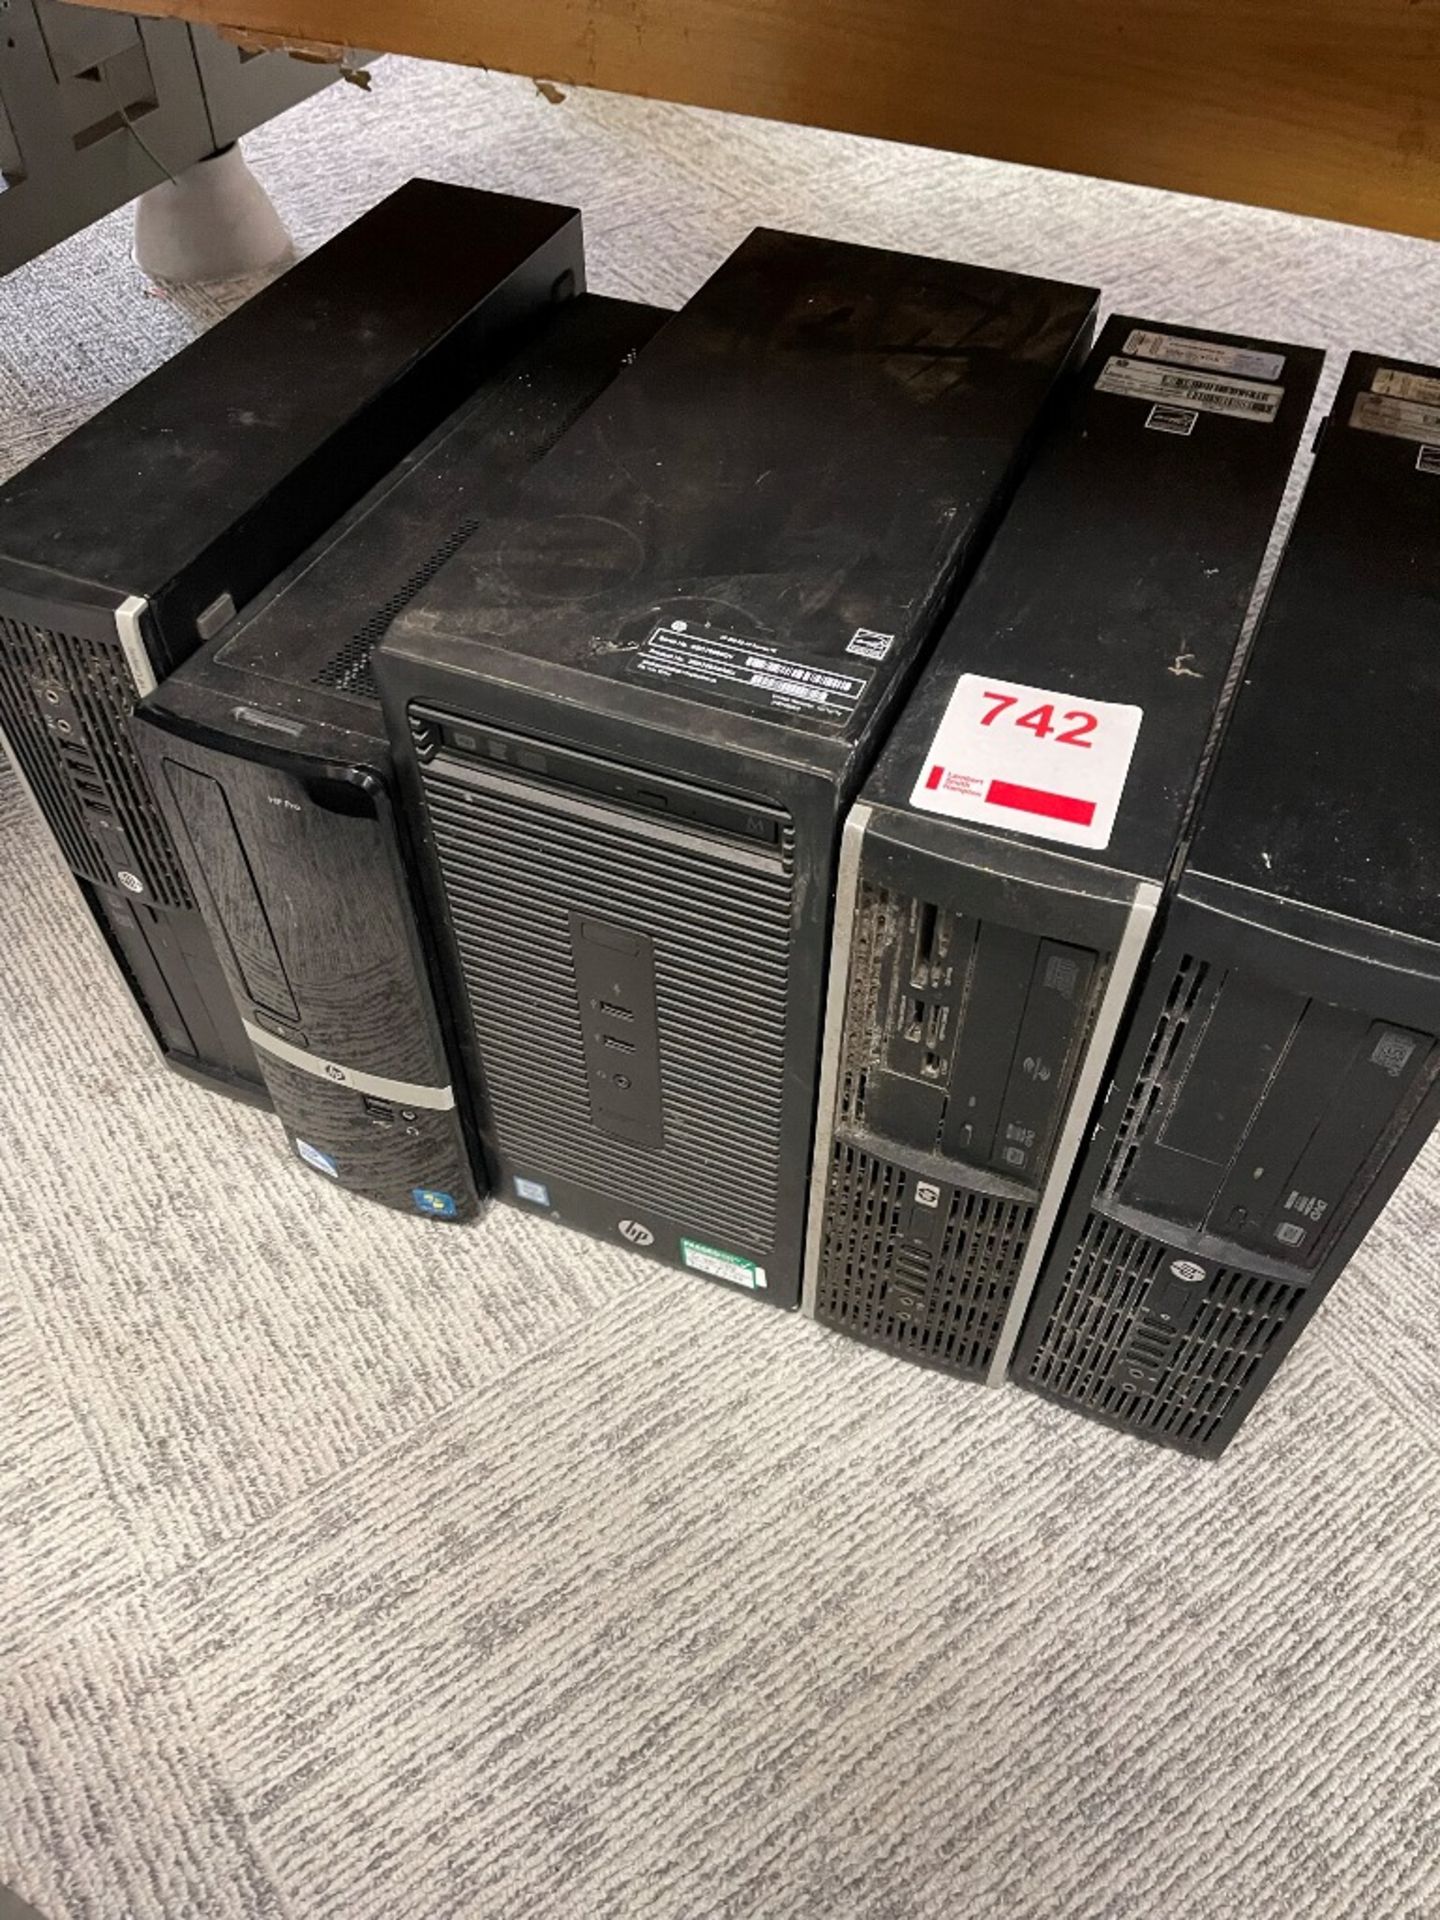 Five various HP computer towers, five keyboards